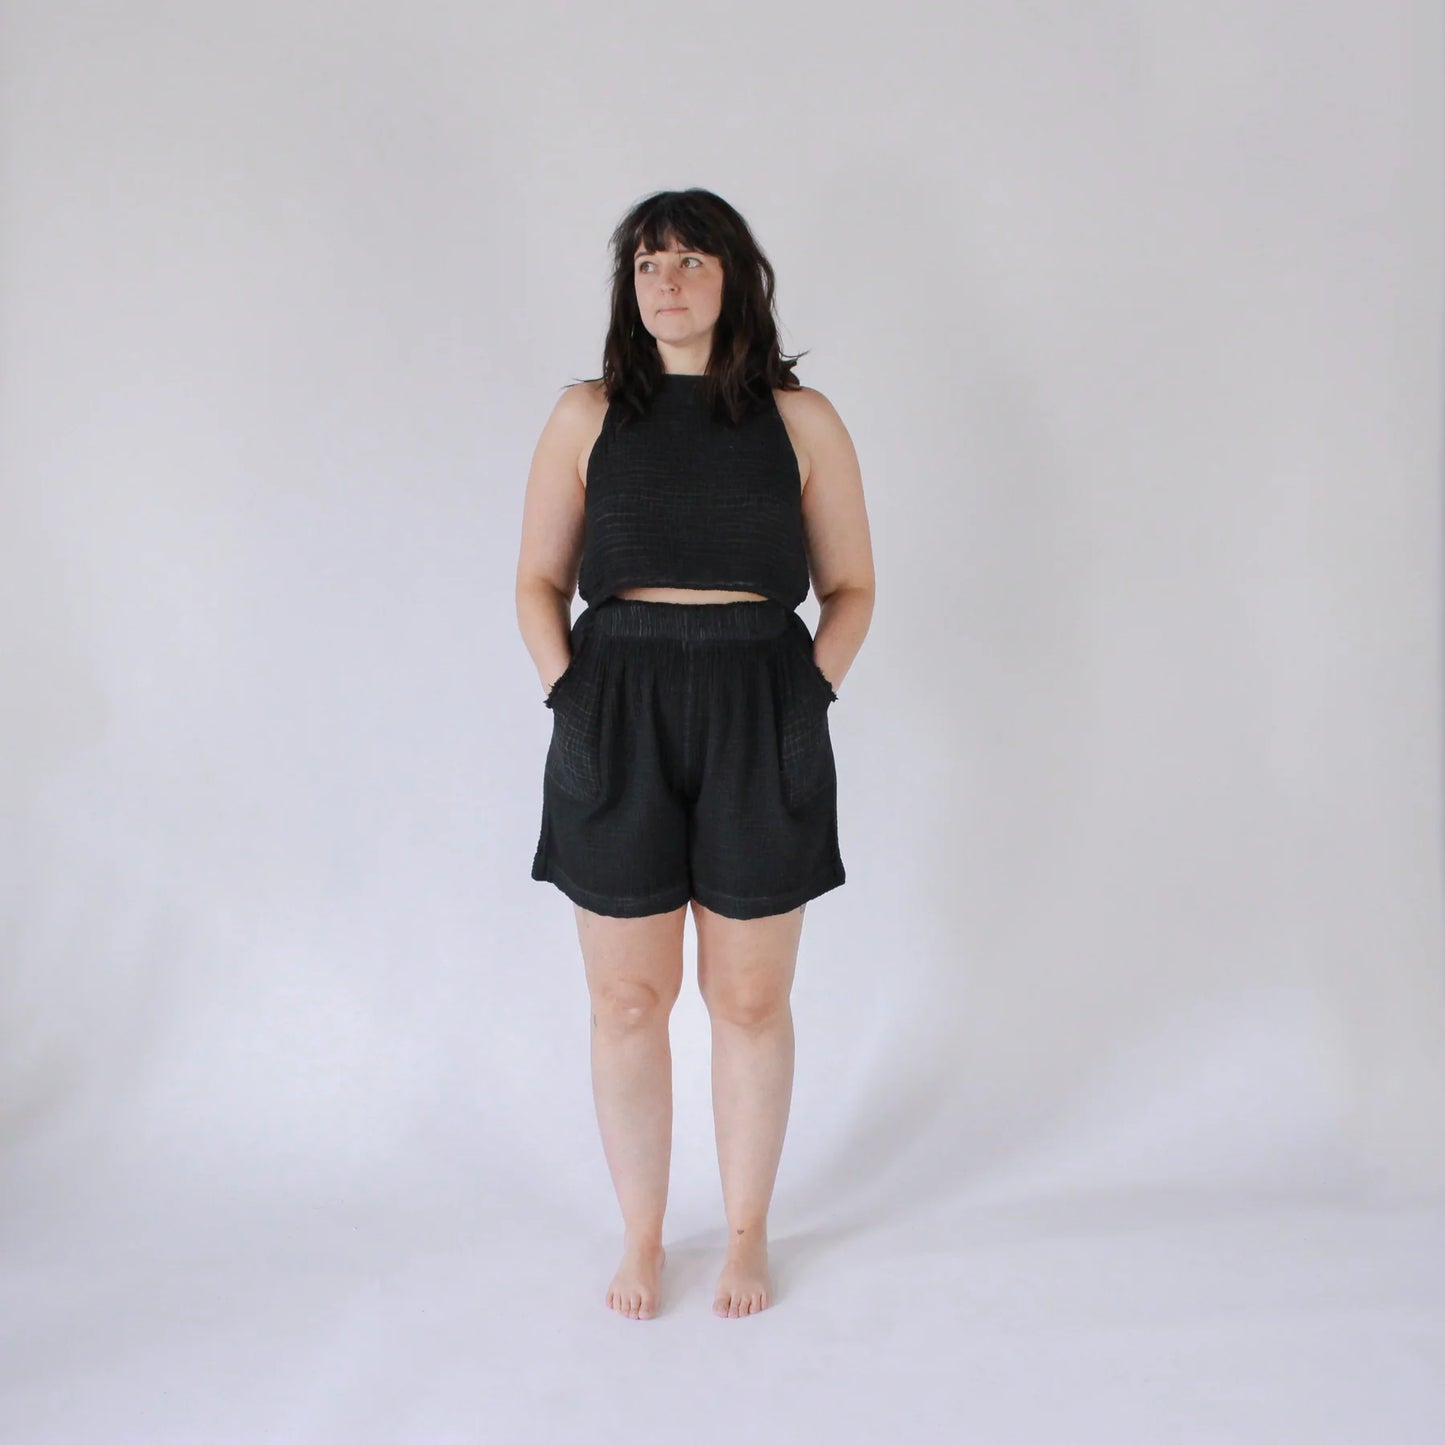 Crinkle Relaxed Shorts - One Sized - Black